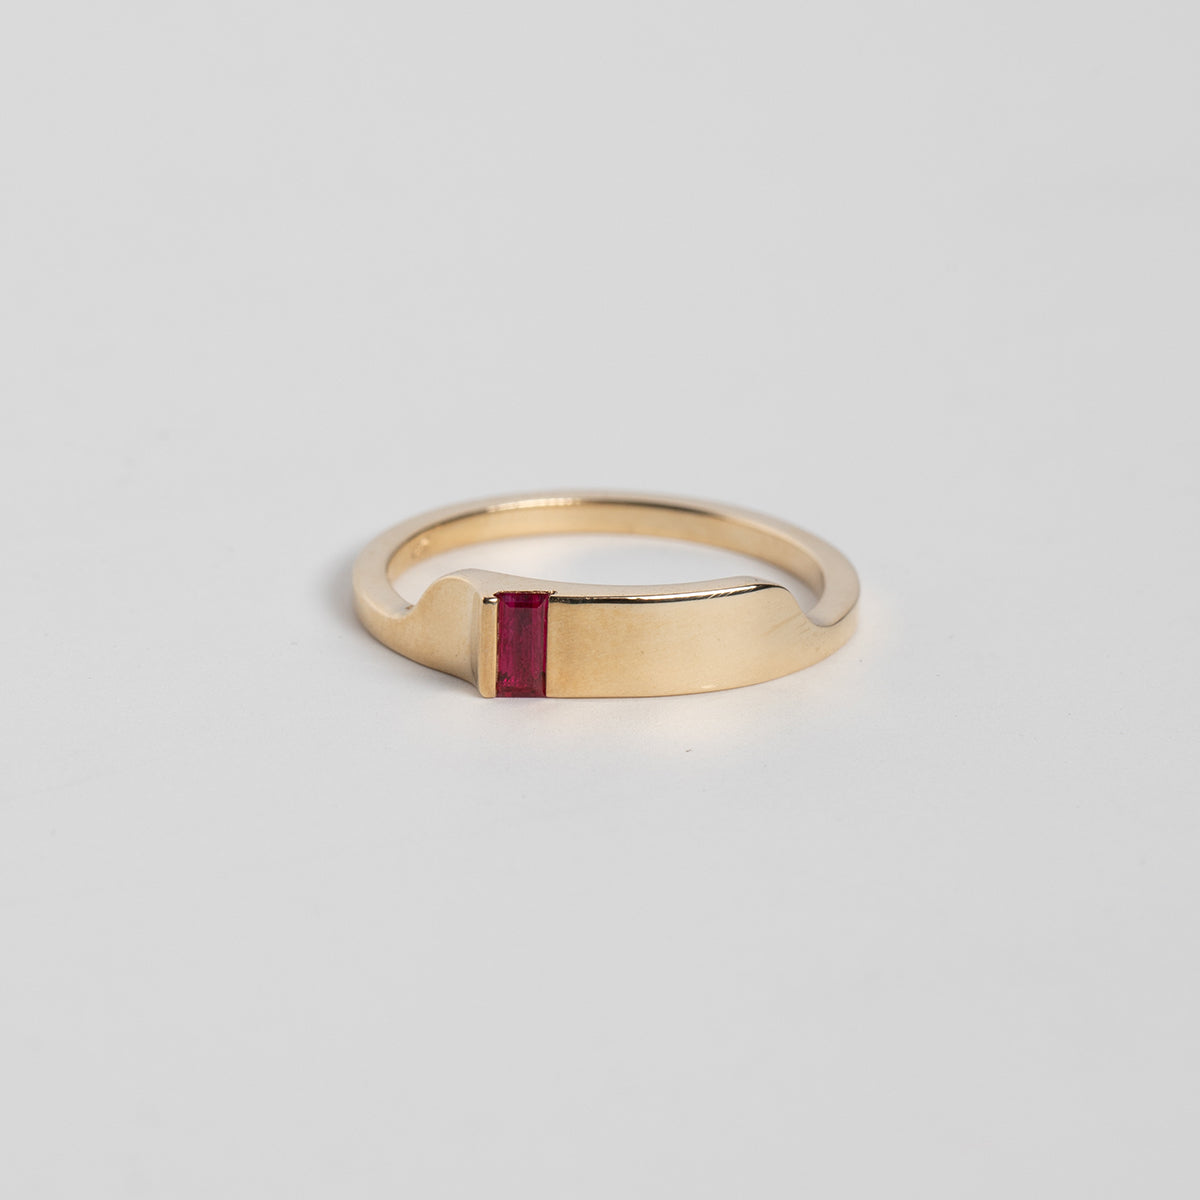 Designer Tylu Ring with precious ruby gemstone set in 14k yellow gold made in NYC by SHW Fine Jewelry